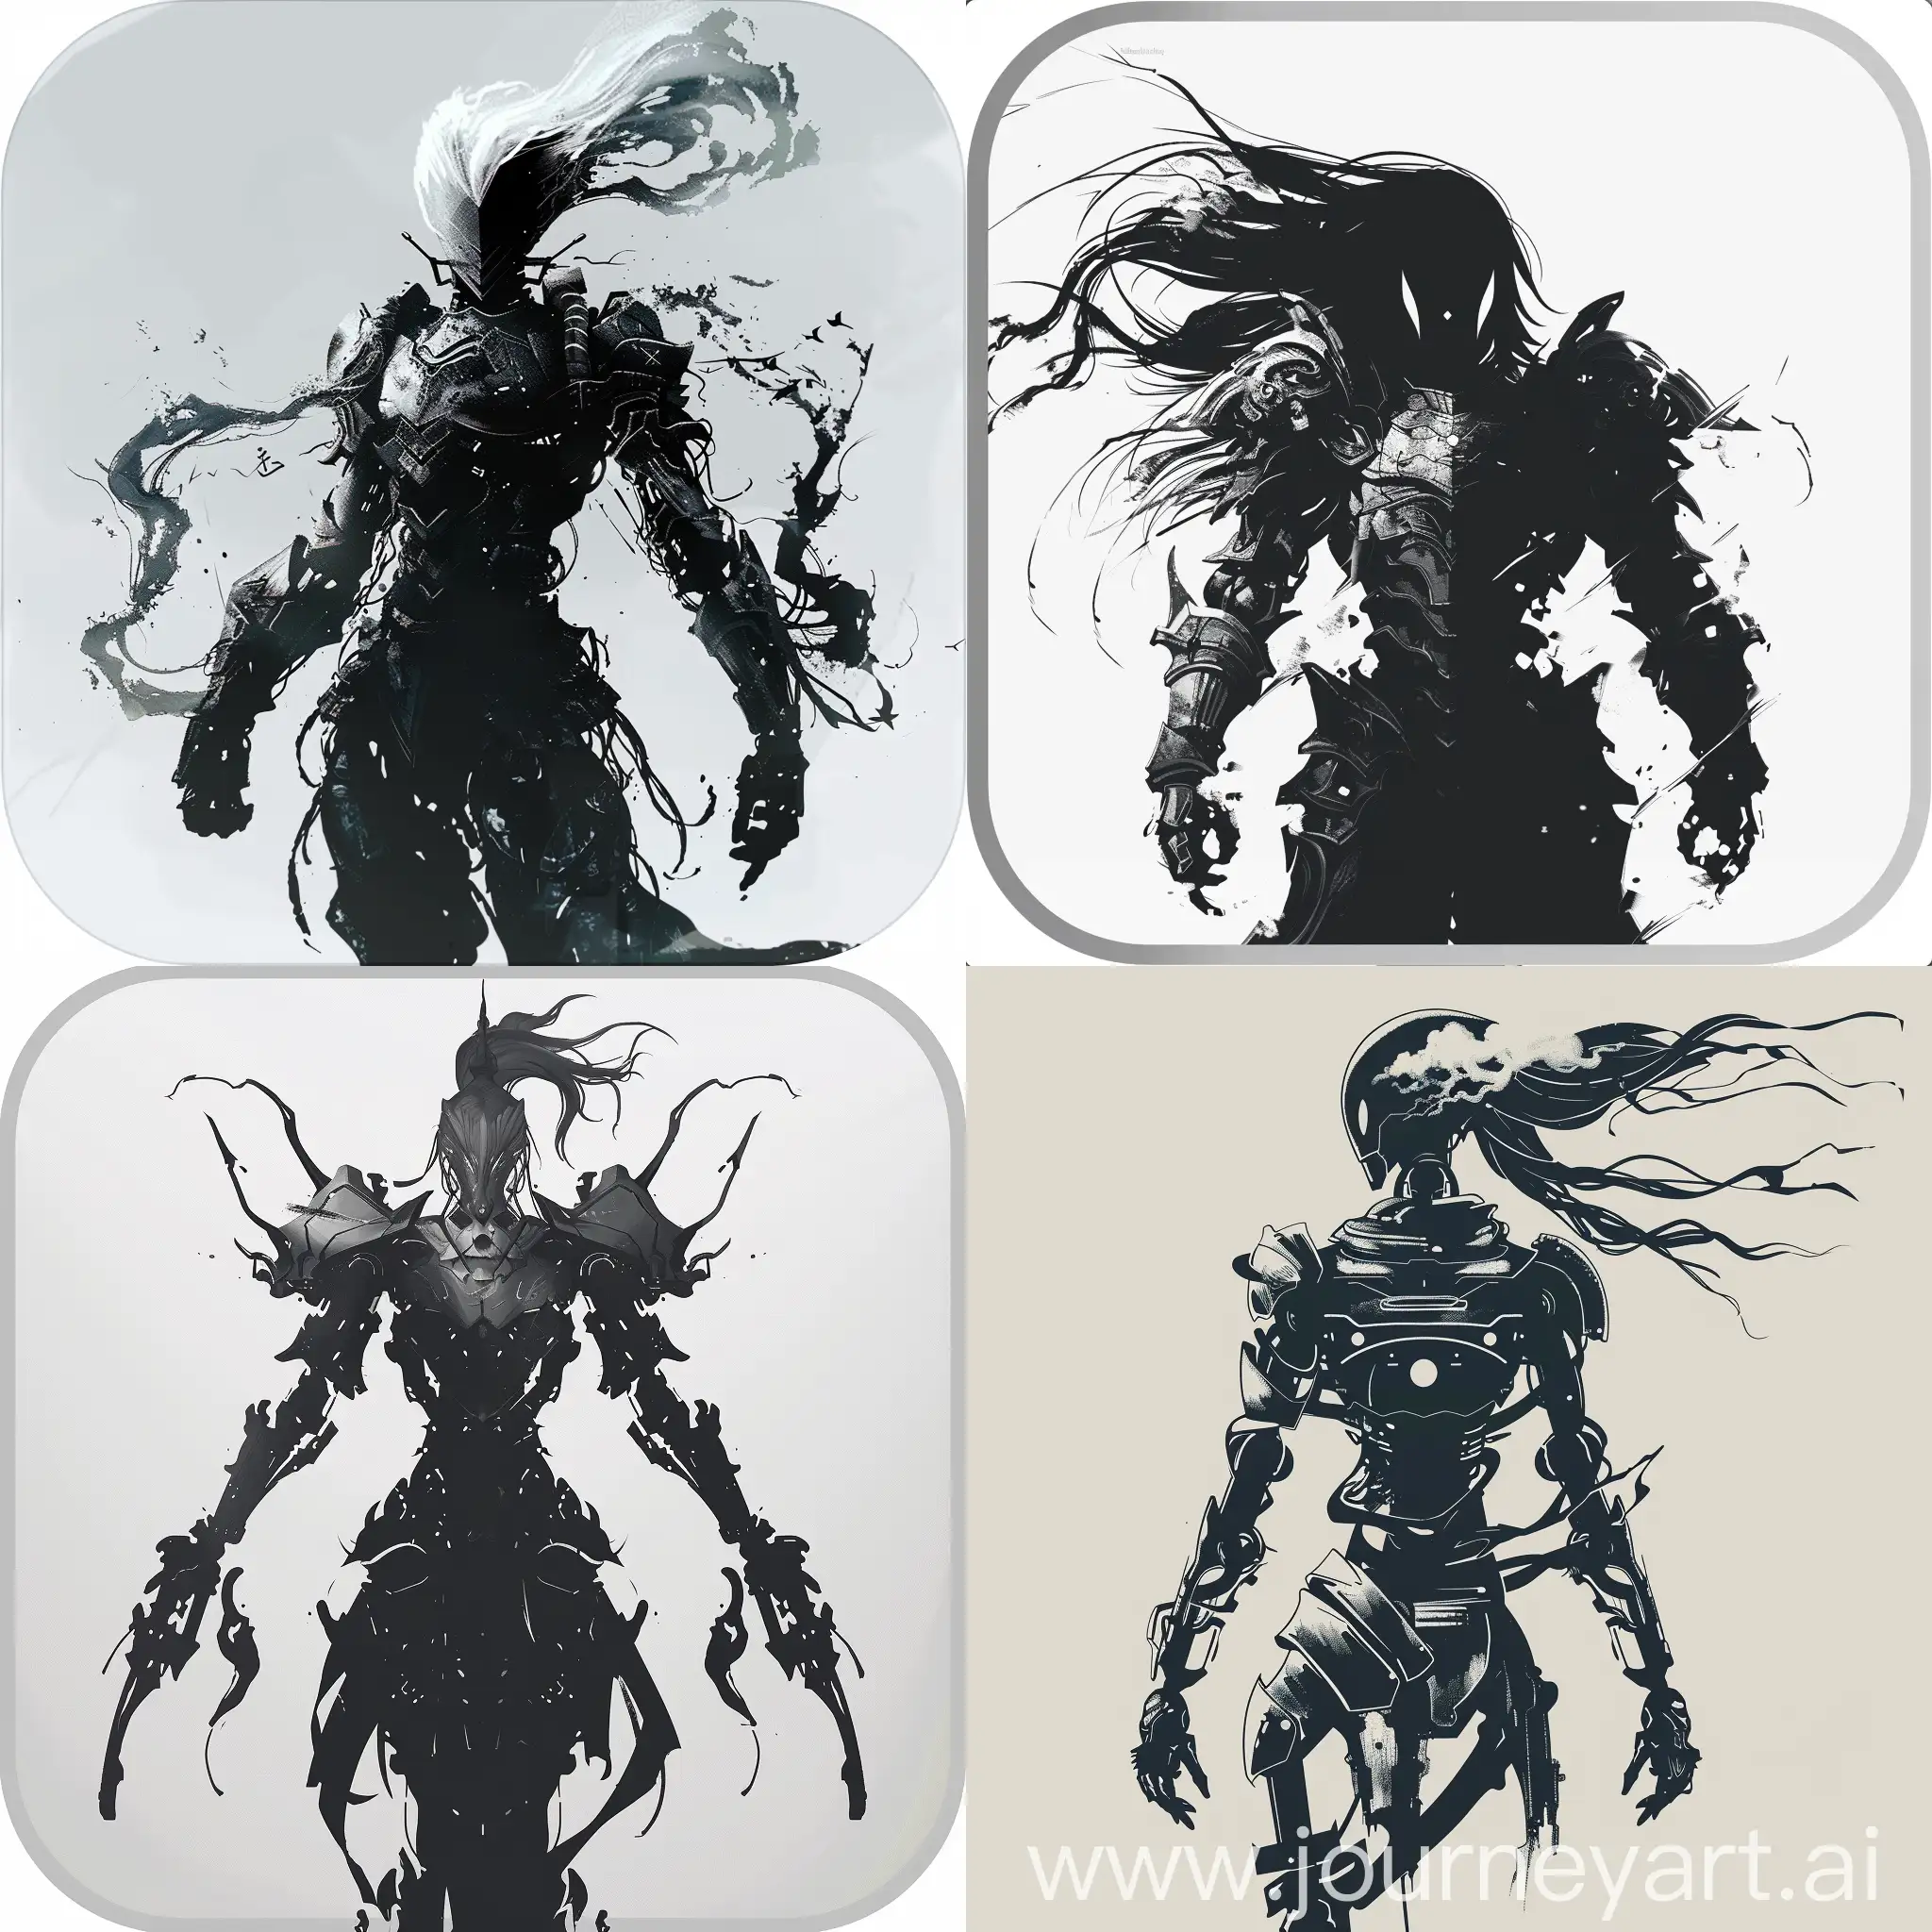 analog button of mobile moba game, there is a silhouette of a shinigami in armor with two arms sketching to the side, the shinigami has long cloud hair, conceptual , robotic shinigami